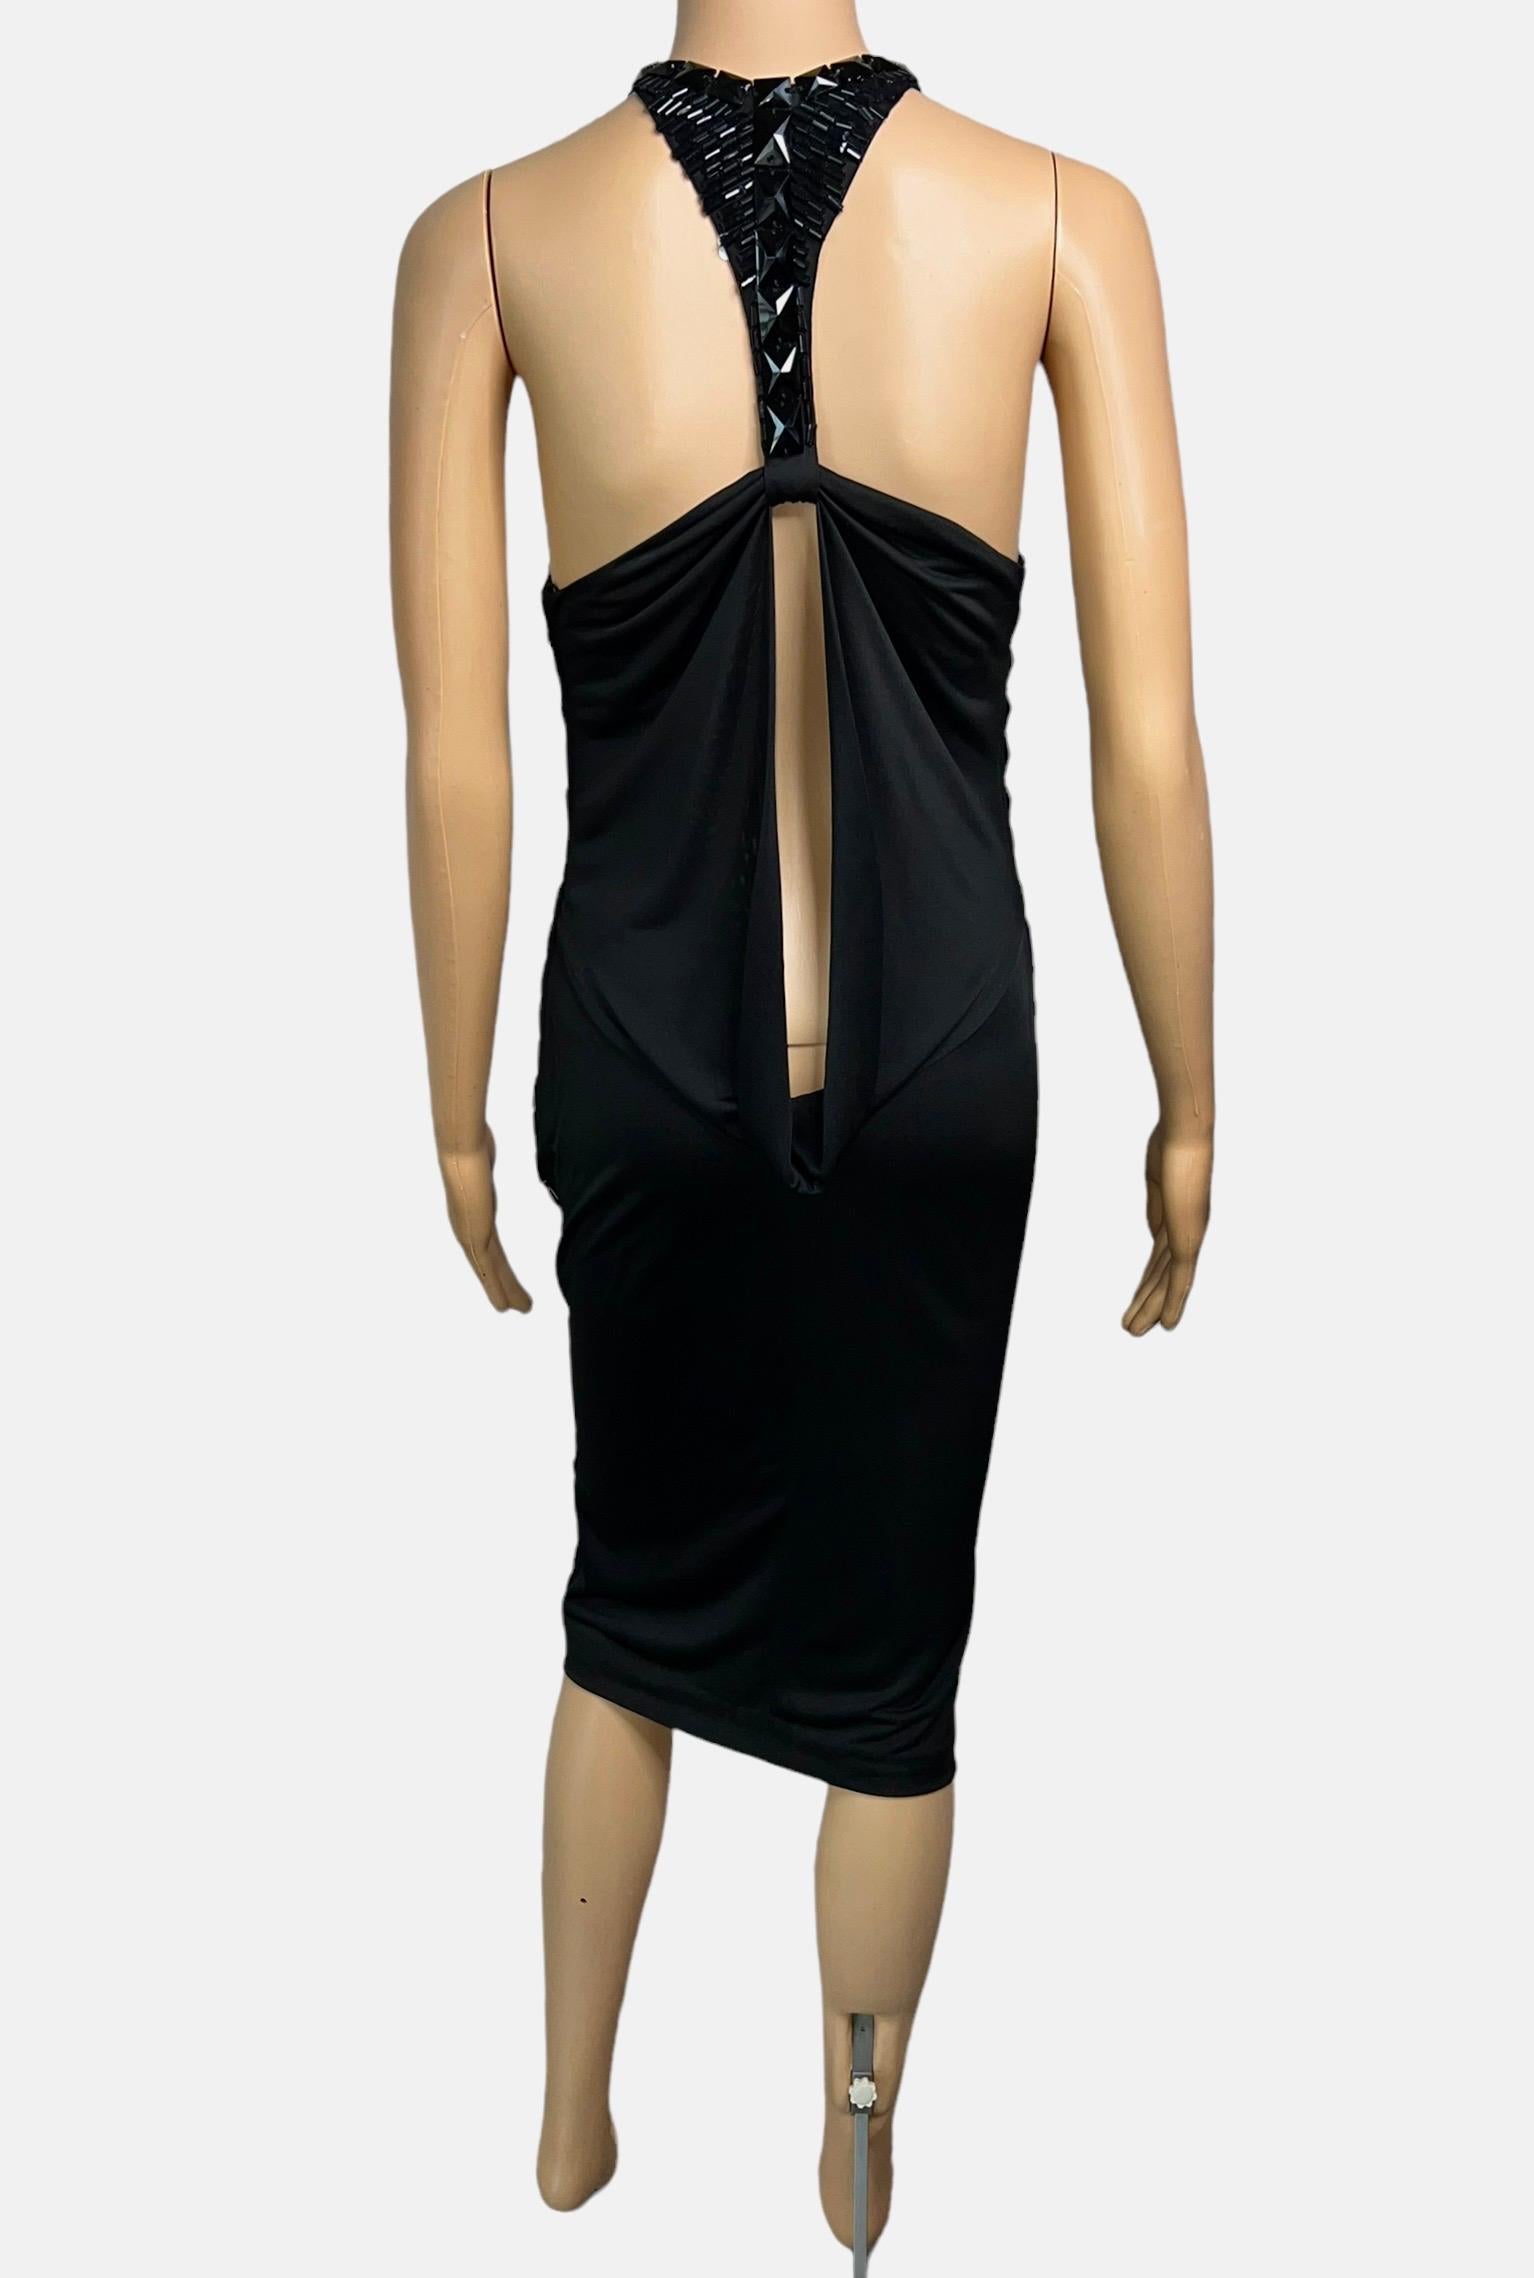 Tom Ford for Gucci F/W 2004 Embellished Plunging Cutout Black Evening Dress  For Sale 3